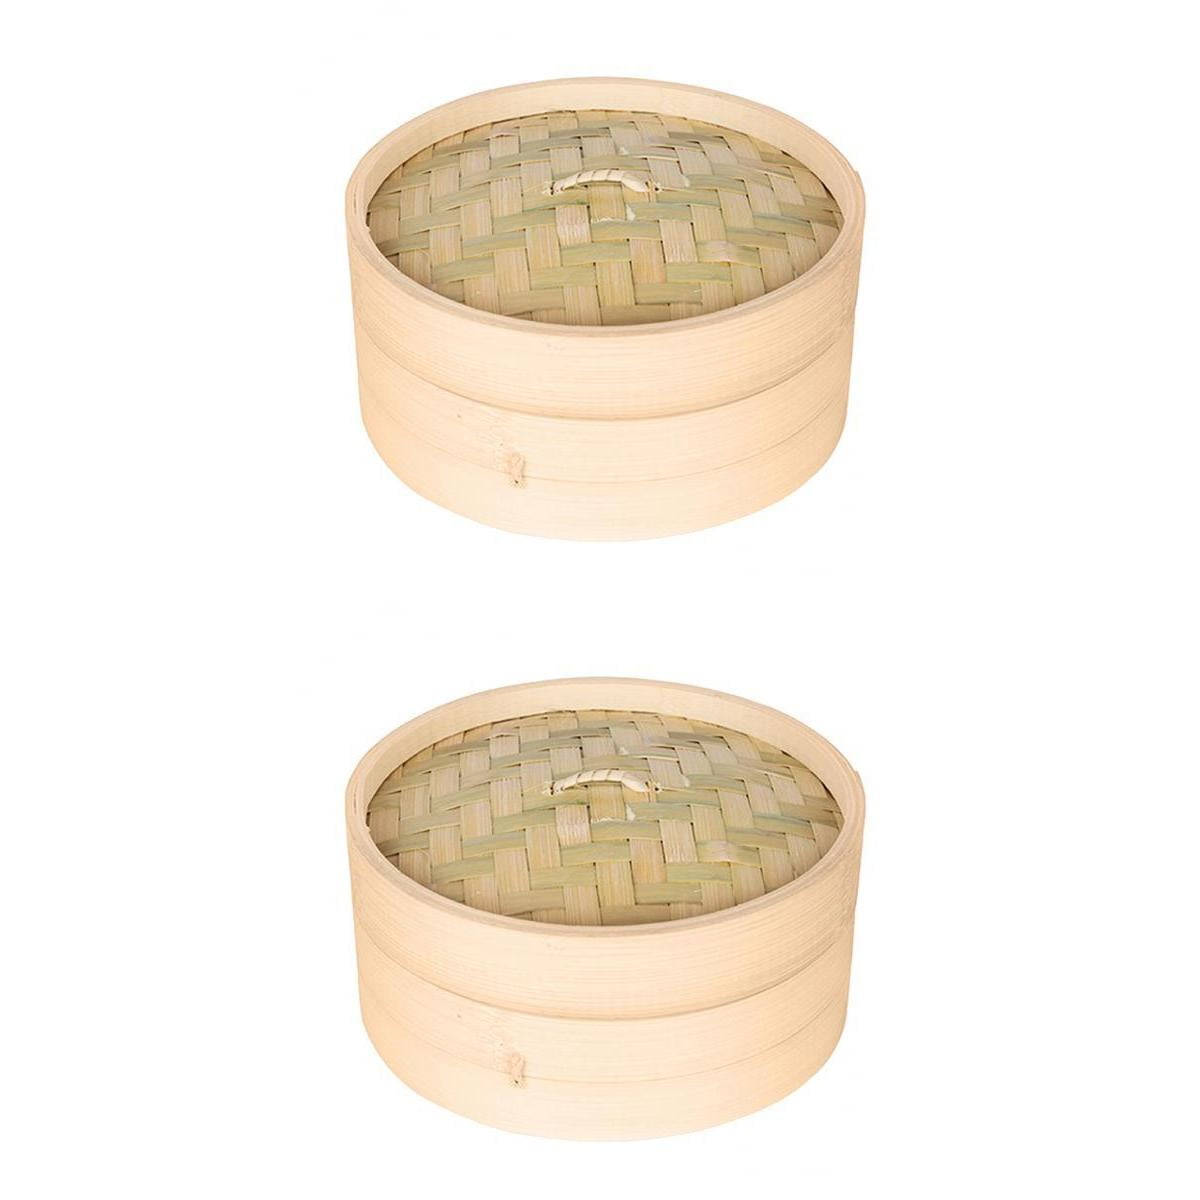 Asian Steamer Baskets for Cooking Perfect for Japanese & Chinese Cuisine 10 Inch Handmade Natural Bamboo Dumpling Steamer 2 Tires Basket with Lid Includes 10 Reusable Cotton Steamer Liners 